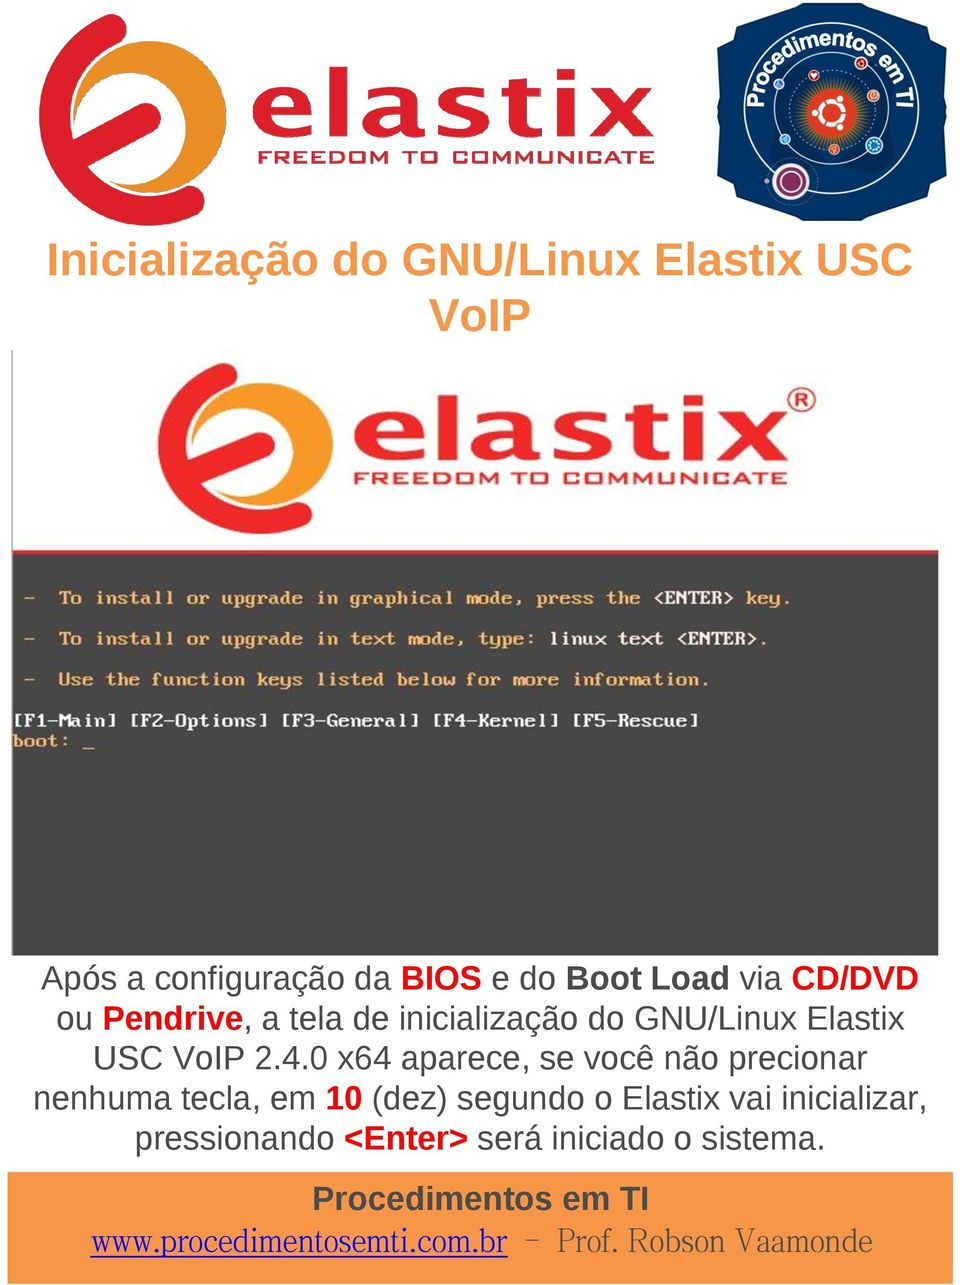 USC VoIP 2.4.